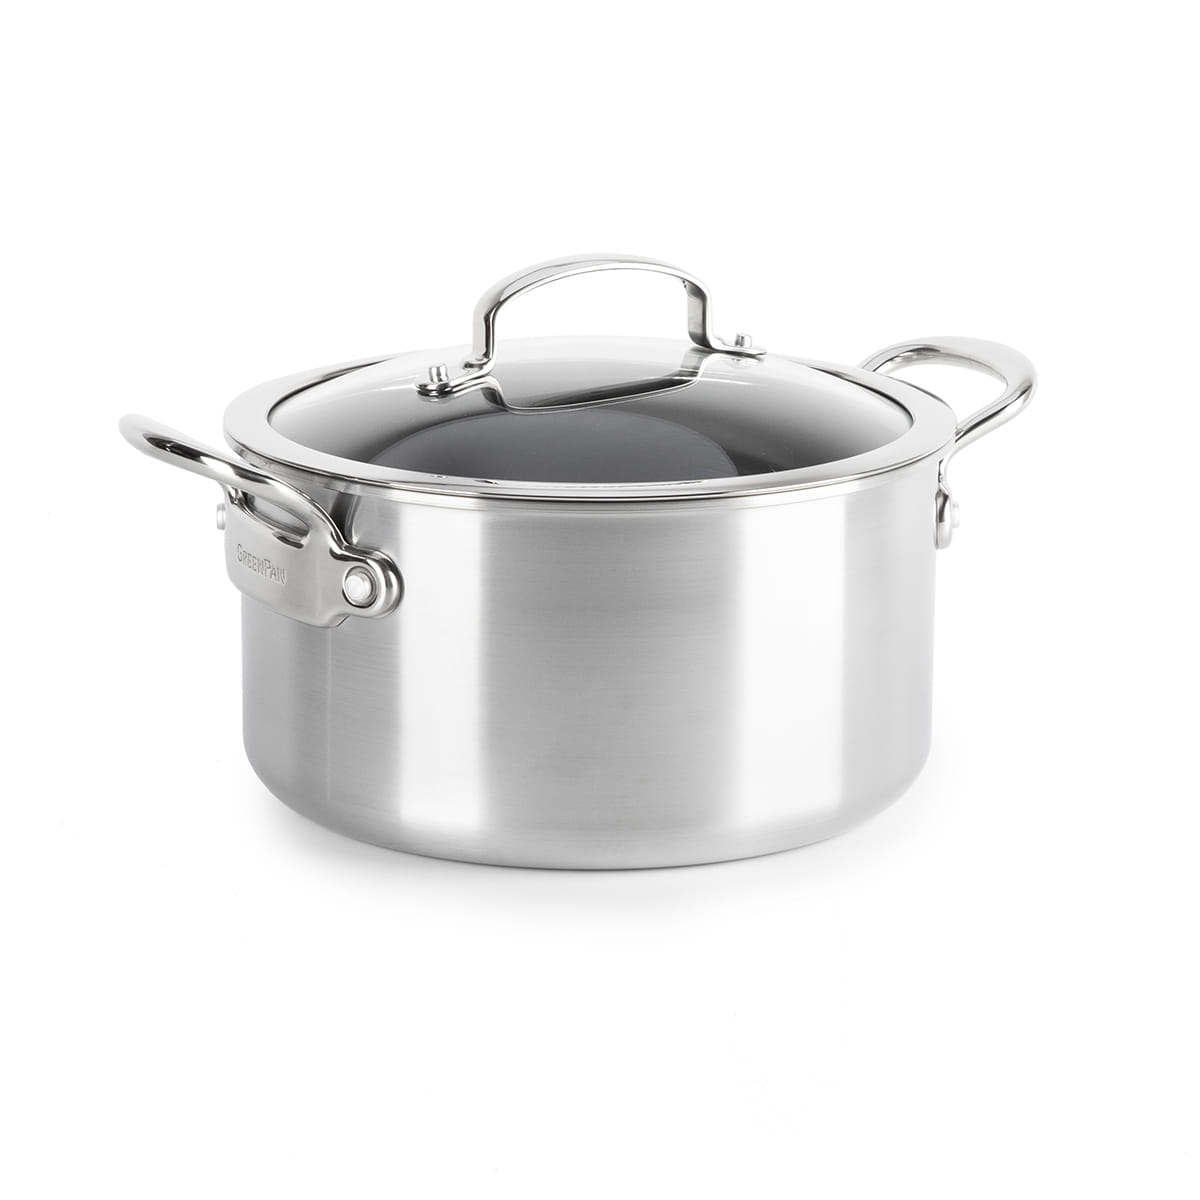 CC004407-001 - Premiere  Stock Pot with Lid, Stainless Steel - 24cm - Product Image 1